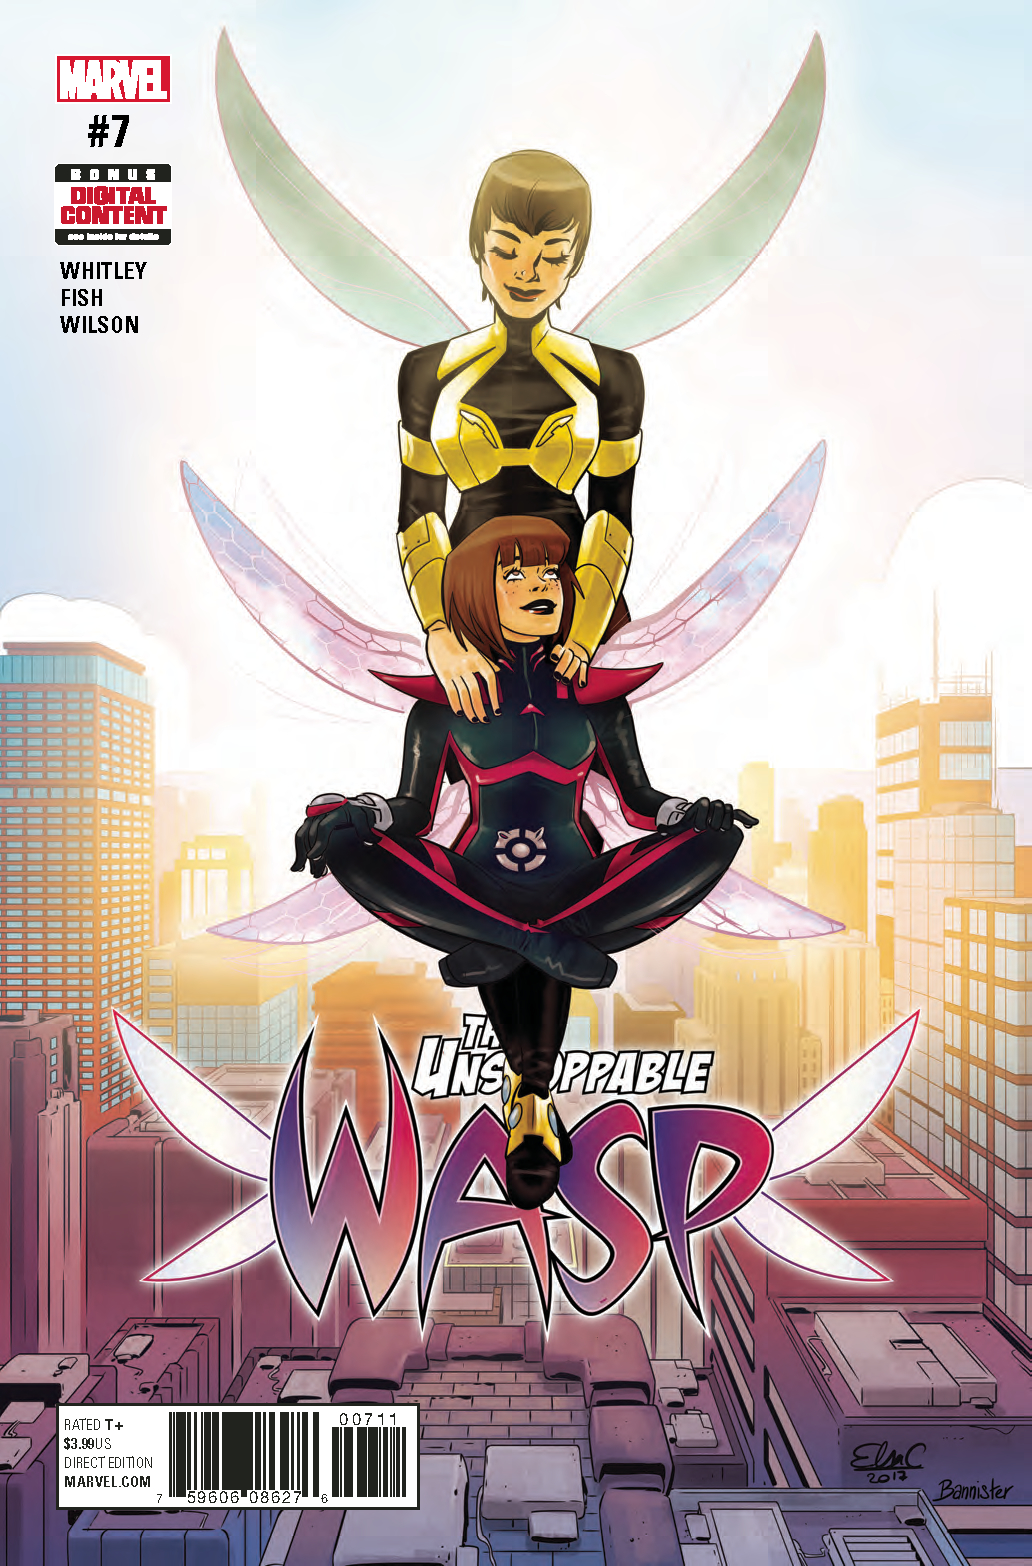 UNSTOPPABLE WASP #7